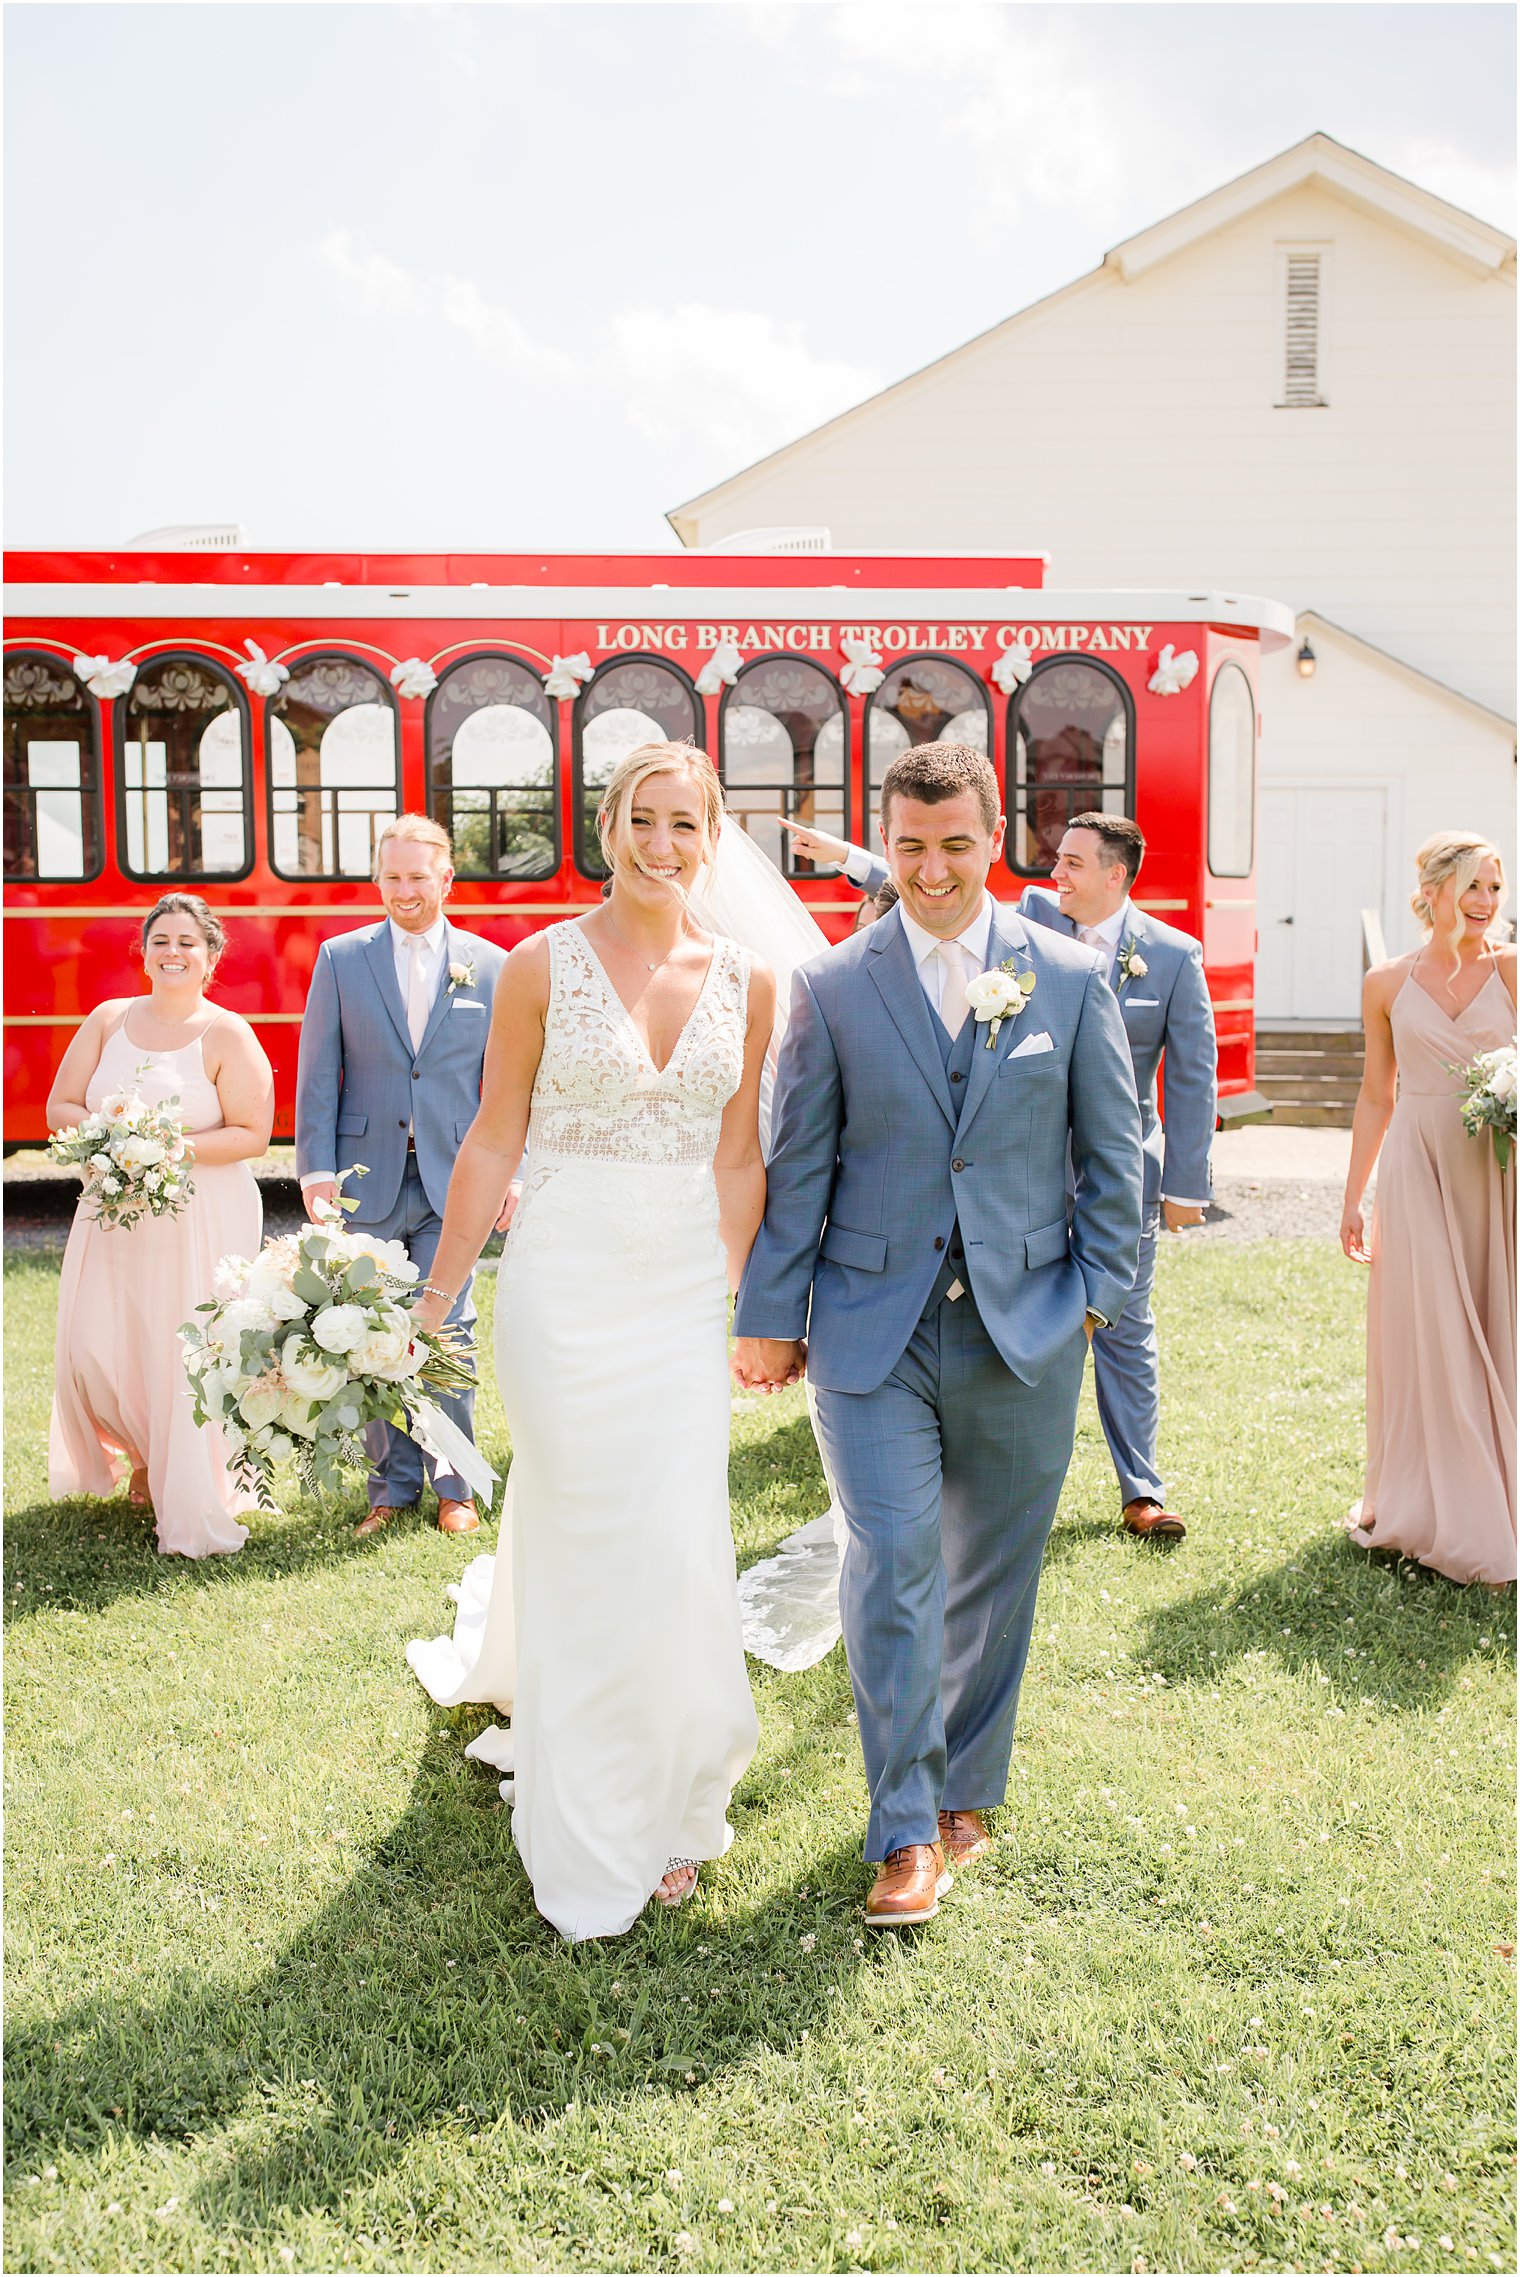 Candid photo of bride and groom walking in front of bridal party and red trolley 